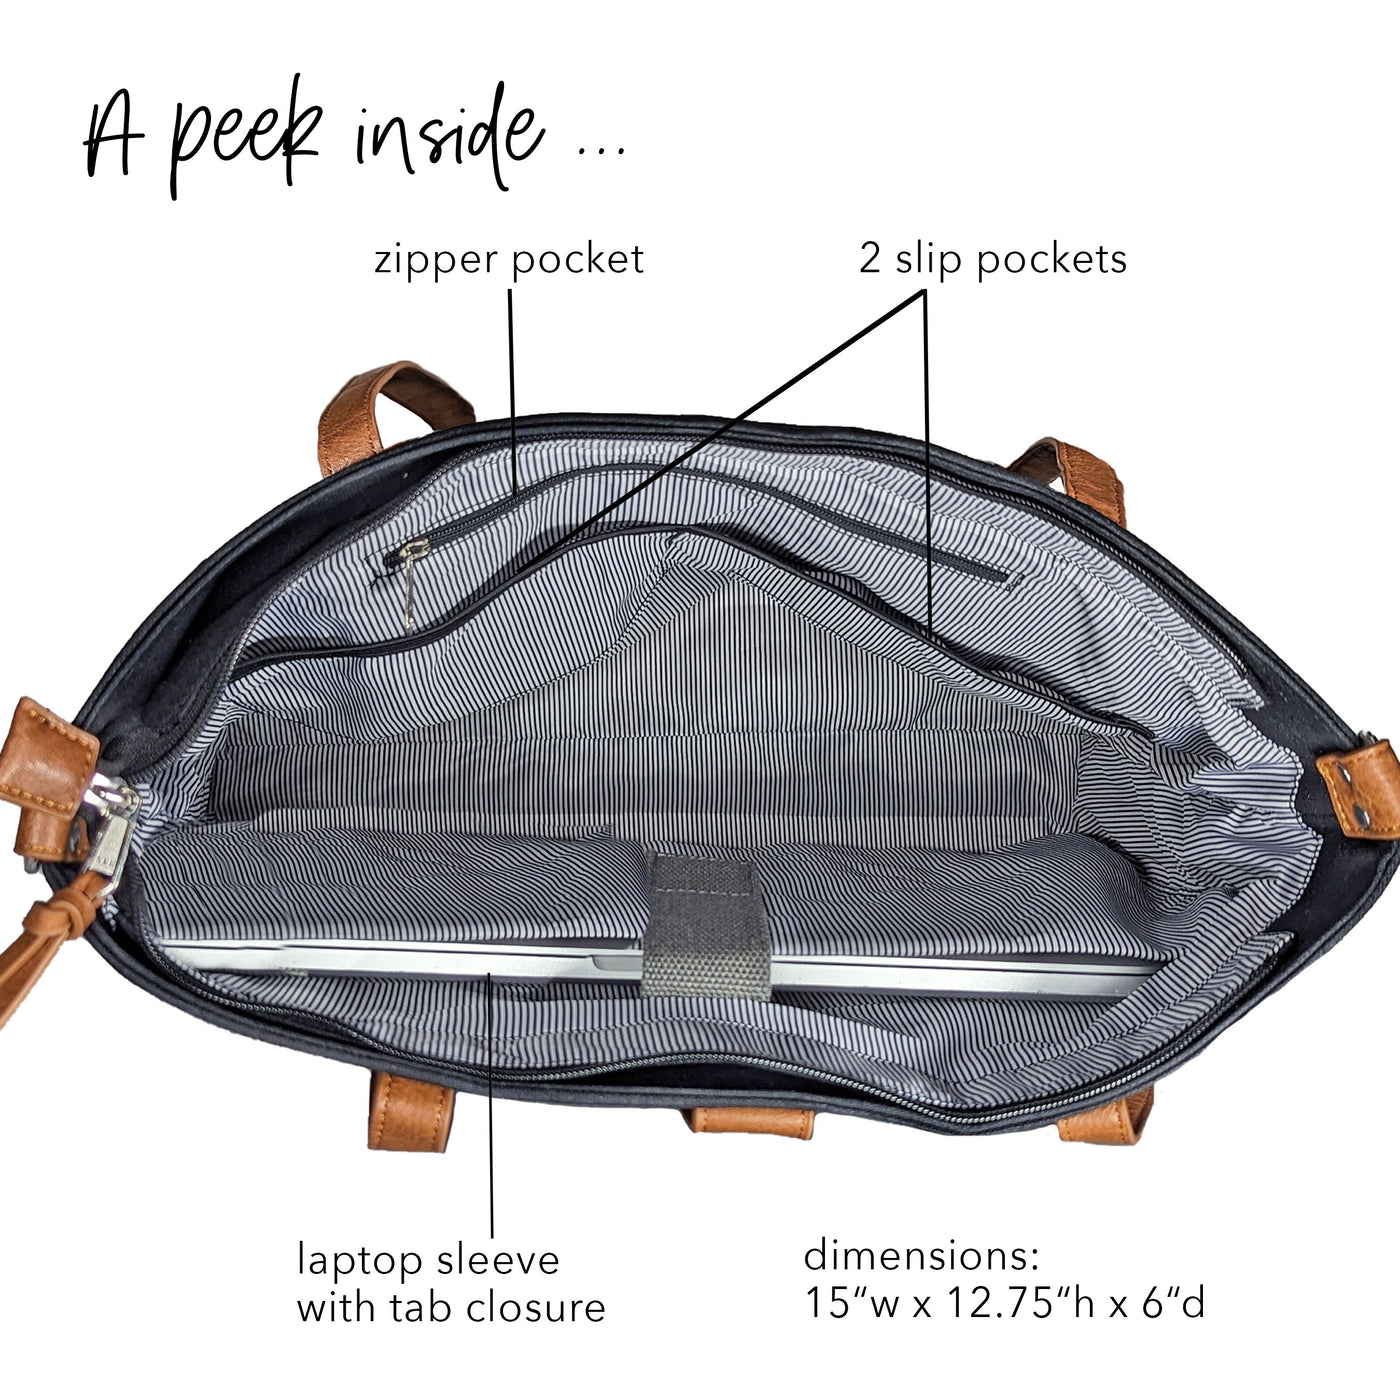 Top-down view of the CarryAll Tote bag interior, showing laptop sleeve, 2 slip pockets and 1 zipper pocket, all fully-lined with a thin B&W stripe pattern.